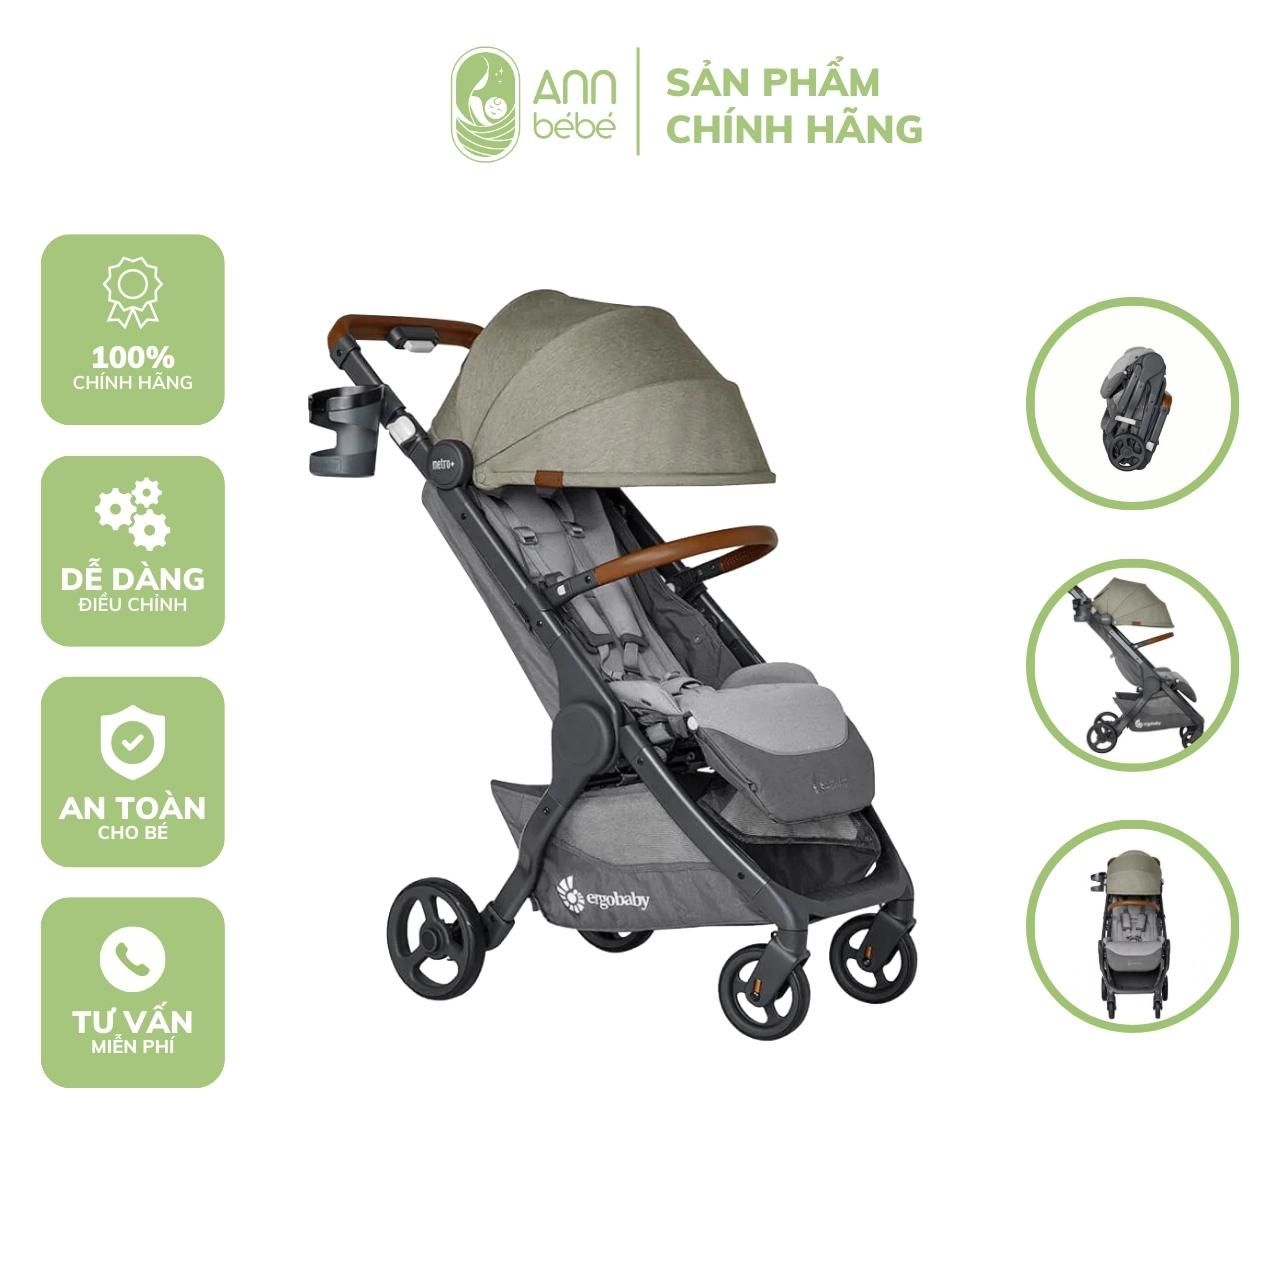  Xe Đẩy Gấp Gọn Ergobaby Metro+ Deluxe – Màu Empire State Green | ANNBEBE 